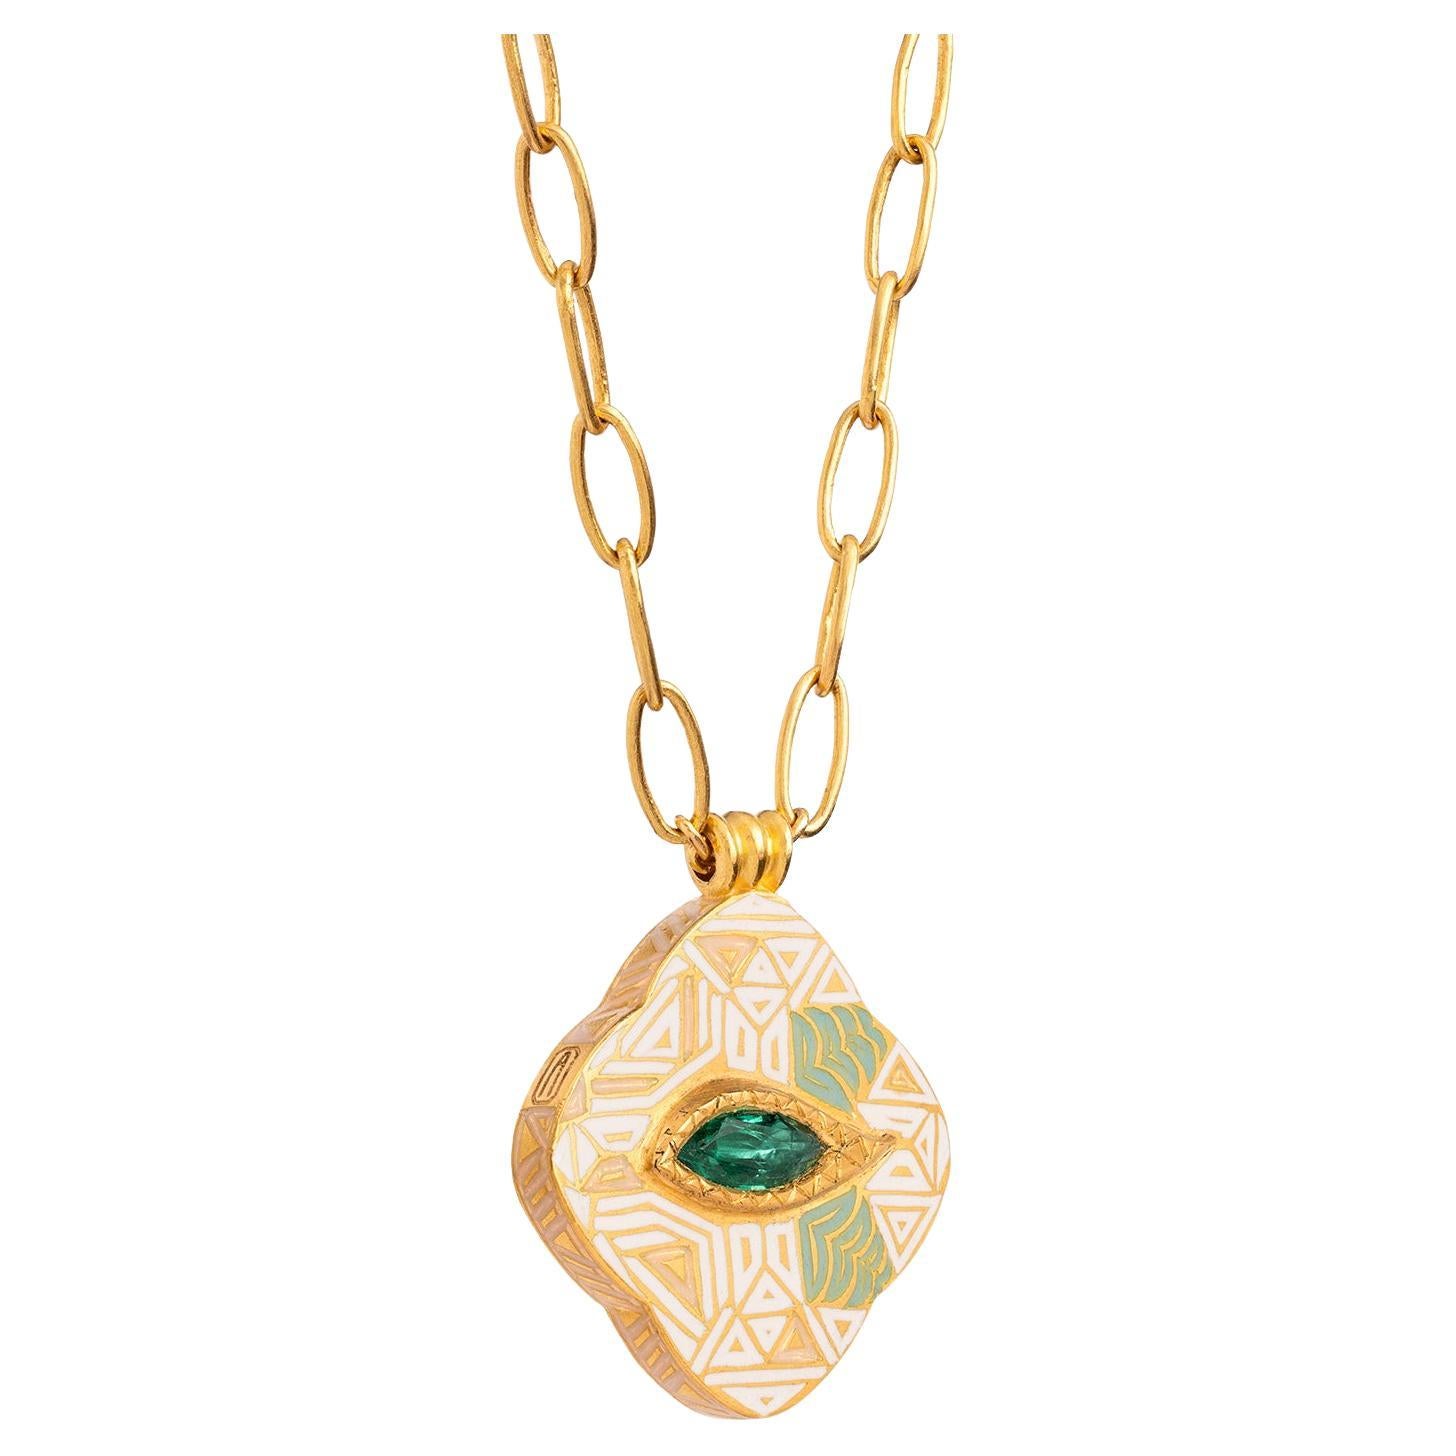 Marquise Cut 23.5K Gold Enamel Eye Pendant Necklace with 0.6 Carat Marquise Emerald by Agaro For Sale